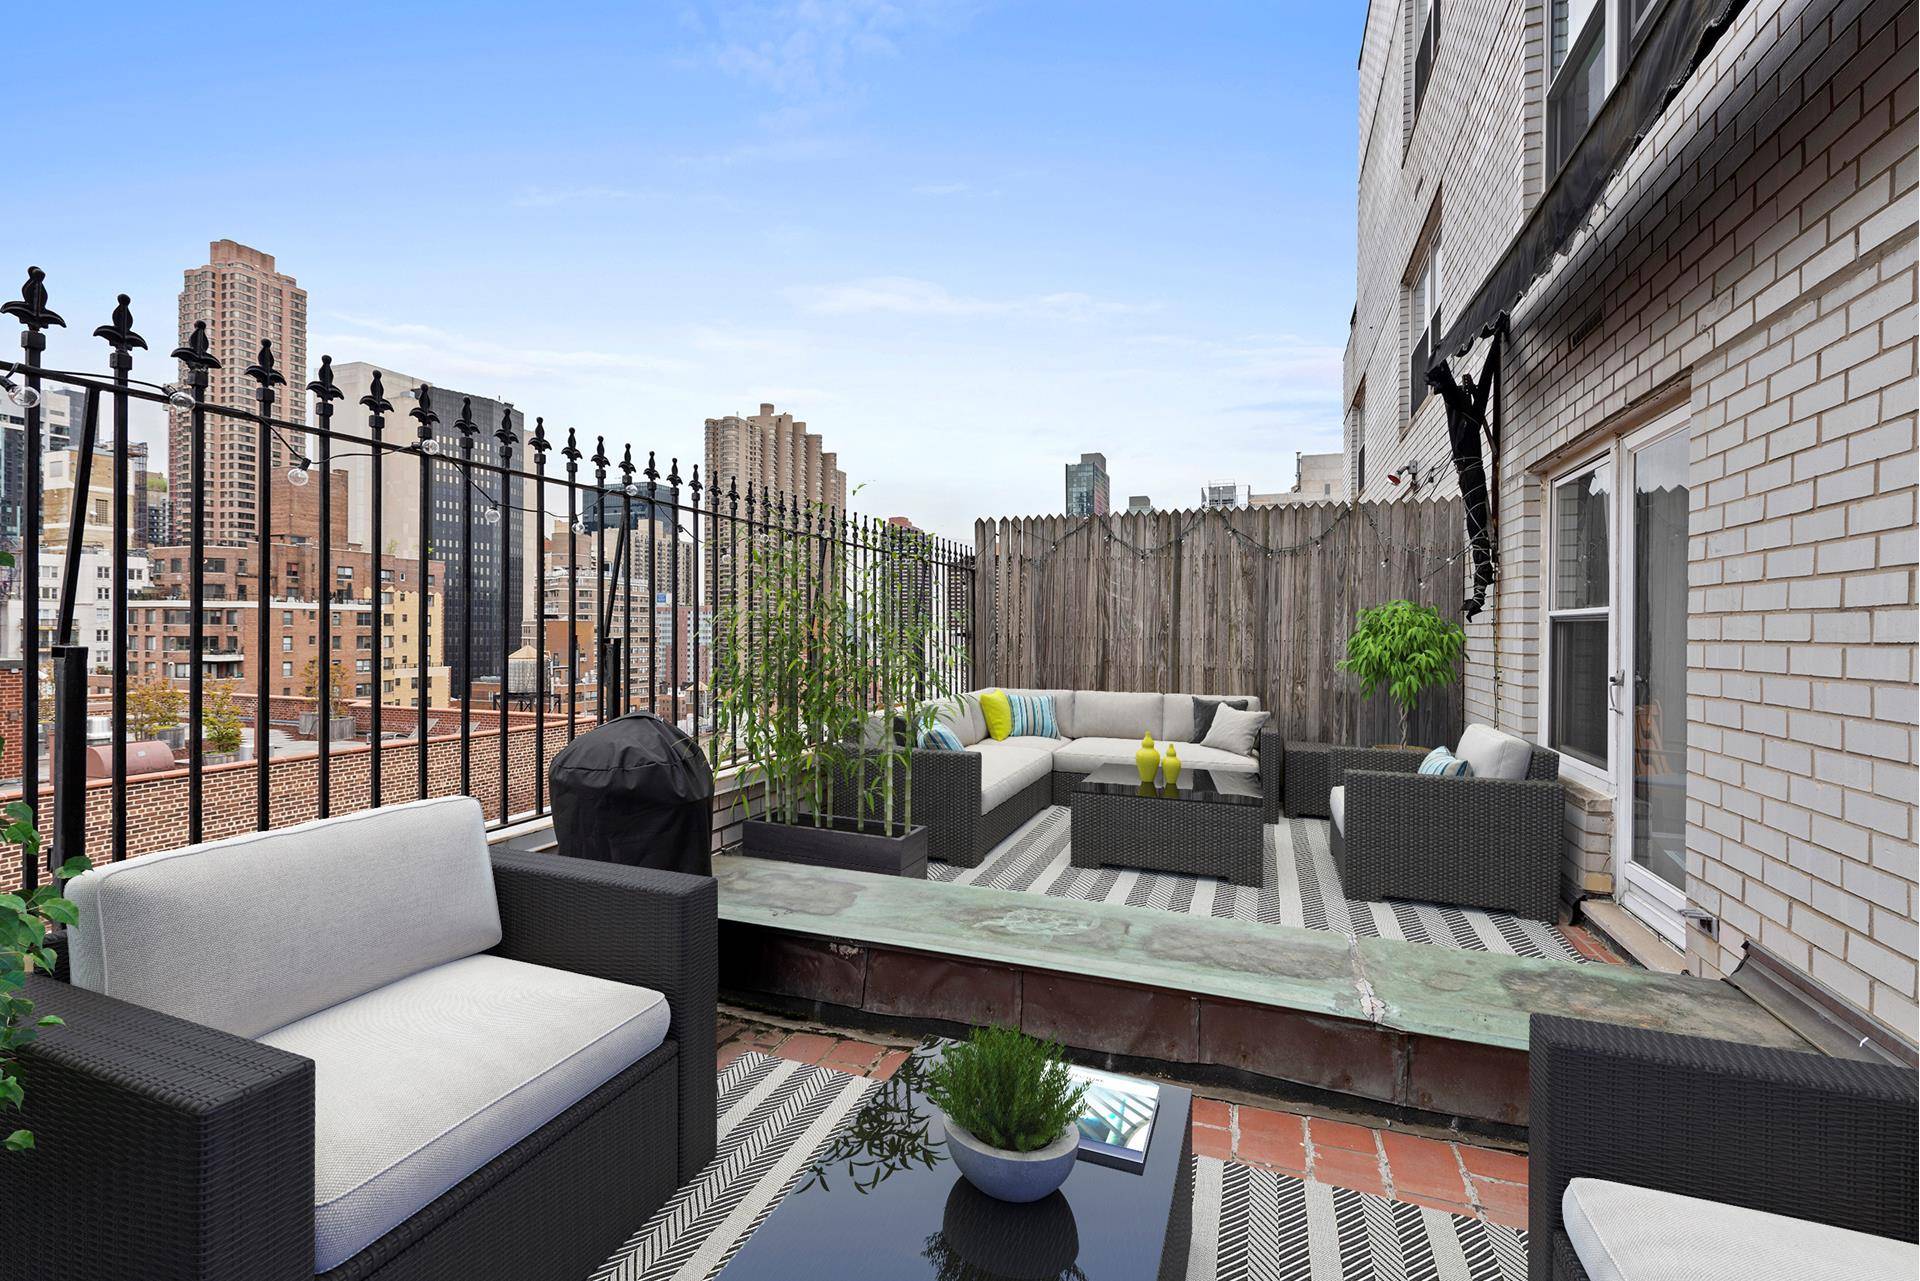 This rare high floor property with an amazing, oversized setback terrace offers drop dead views of Midtown landmarked Sky Scrapers and beyond.